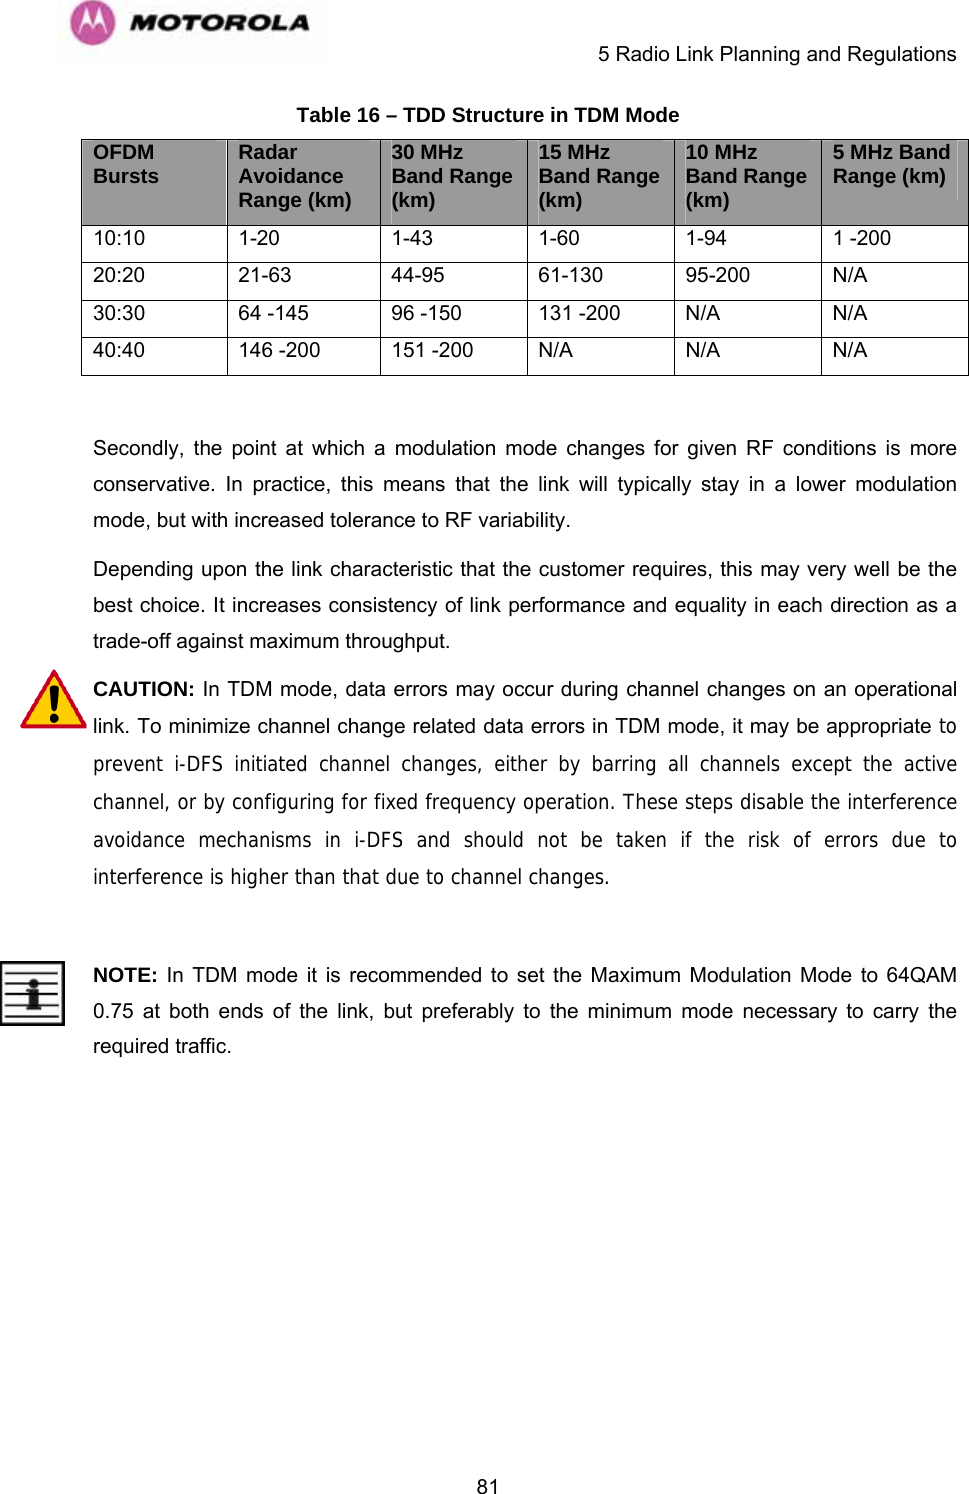     5 Radio Link Planning and Regulations  81Table 16 – TDD Structure in TDM Mode OFDM Bursts  Radar Avoidance Range (km) 30 MHz Band Range (km) 15 MHz Band Range (km) 10 MHz Band Range (km) 5 MHz Band Range (km) 10:10   1-20   1-43   1-60   1-94   1 -200 20:20   21-63   44-95   61-130  95-200  N/A  30:30   64 -145   96 -150   131 -200   N/A   N/A  40:40   146 -200   151 -200   N/A   N/A   N/A  Secondly, the point at which a modulation mode changes for given RF conditions is more conservative. In practice, this means that the link will typically stay in a lower modulation mode, but with increased tolerance to RF variability. Depending upon the link characteristic that the customer requires, this may very well be the best choice. It increases consistency of link performance and equality in each direction as a trade-off against maximum throughput.      CAUTION: In TDM mode, data errors may occur during channel changes on an operational link. To minimize channel change related data errors in TDM mode, it may be appropriate to prevent i-DFS initiated channel changes, either by barring all channels except the active channel, or by configuring for fixed frequency operation. These steps disable the interference avoidance mechanisms in i-DFS and should not be taken if the risk of errors due to interference is higher than that due to channel changes.  NOTE: In TDM mode it is recommended to set the Maximum Modulation Mode to 64QAM 0.75 at both ends of the link, but preferably to the minimum mode necessary to carry the required traffic. 